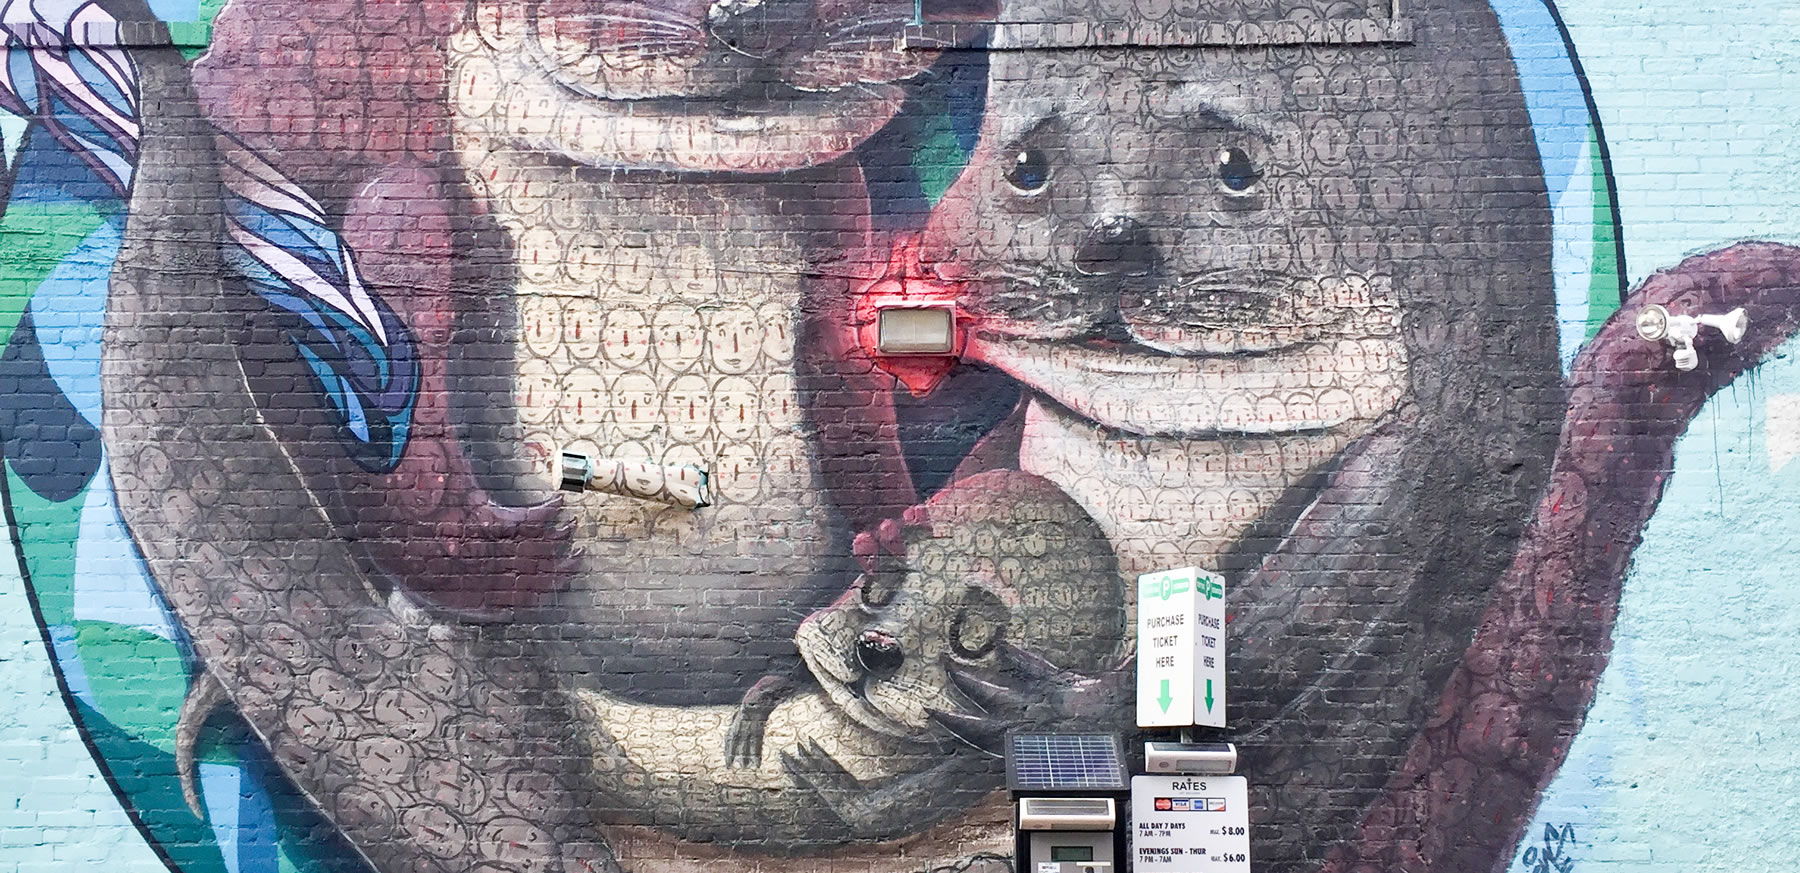 Mural artwork with otters